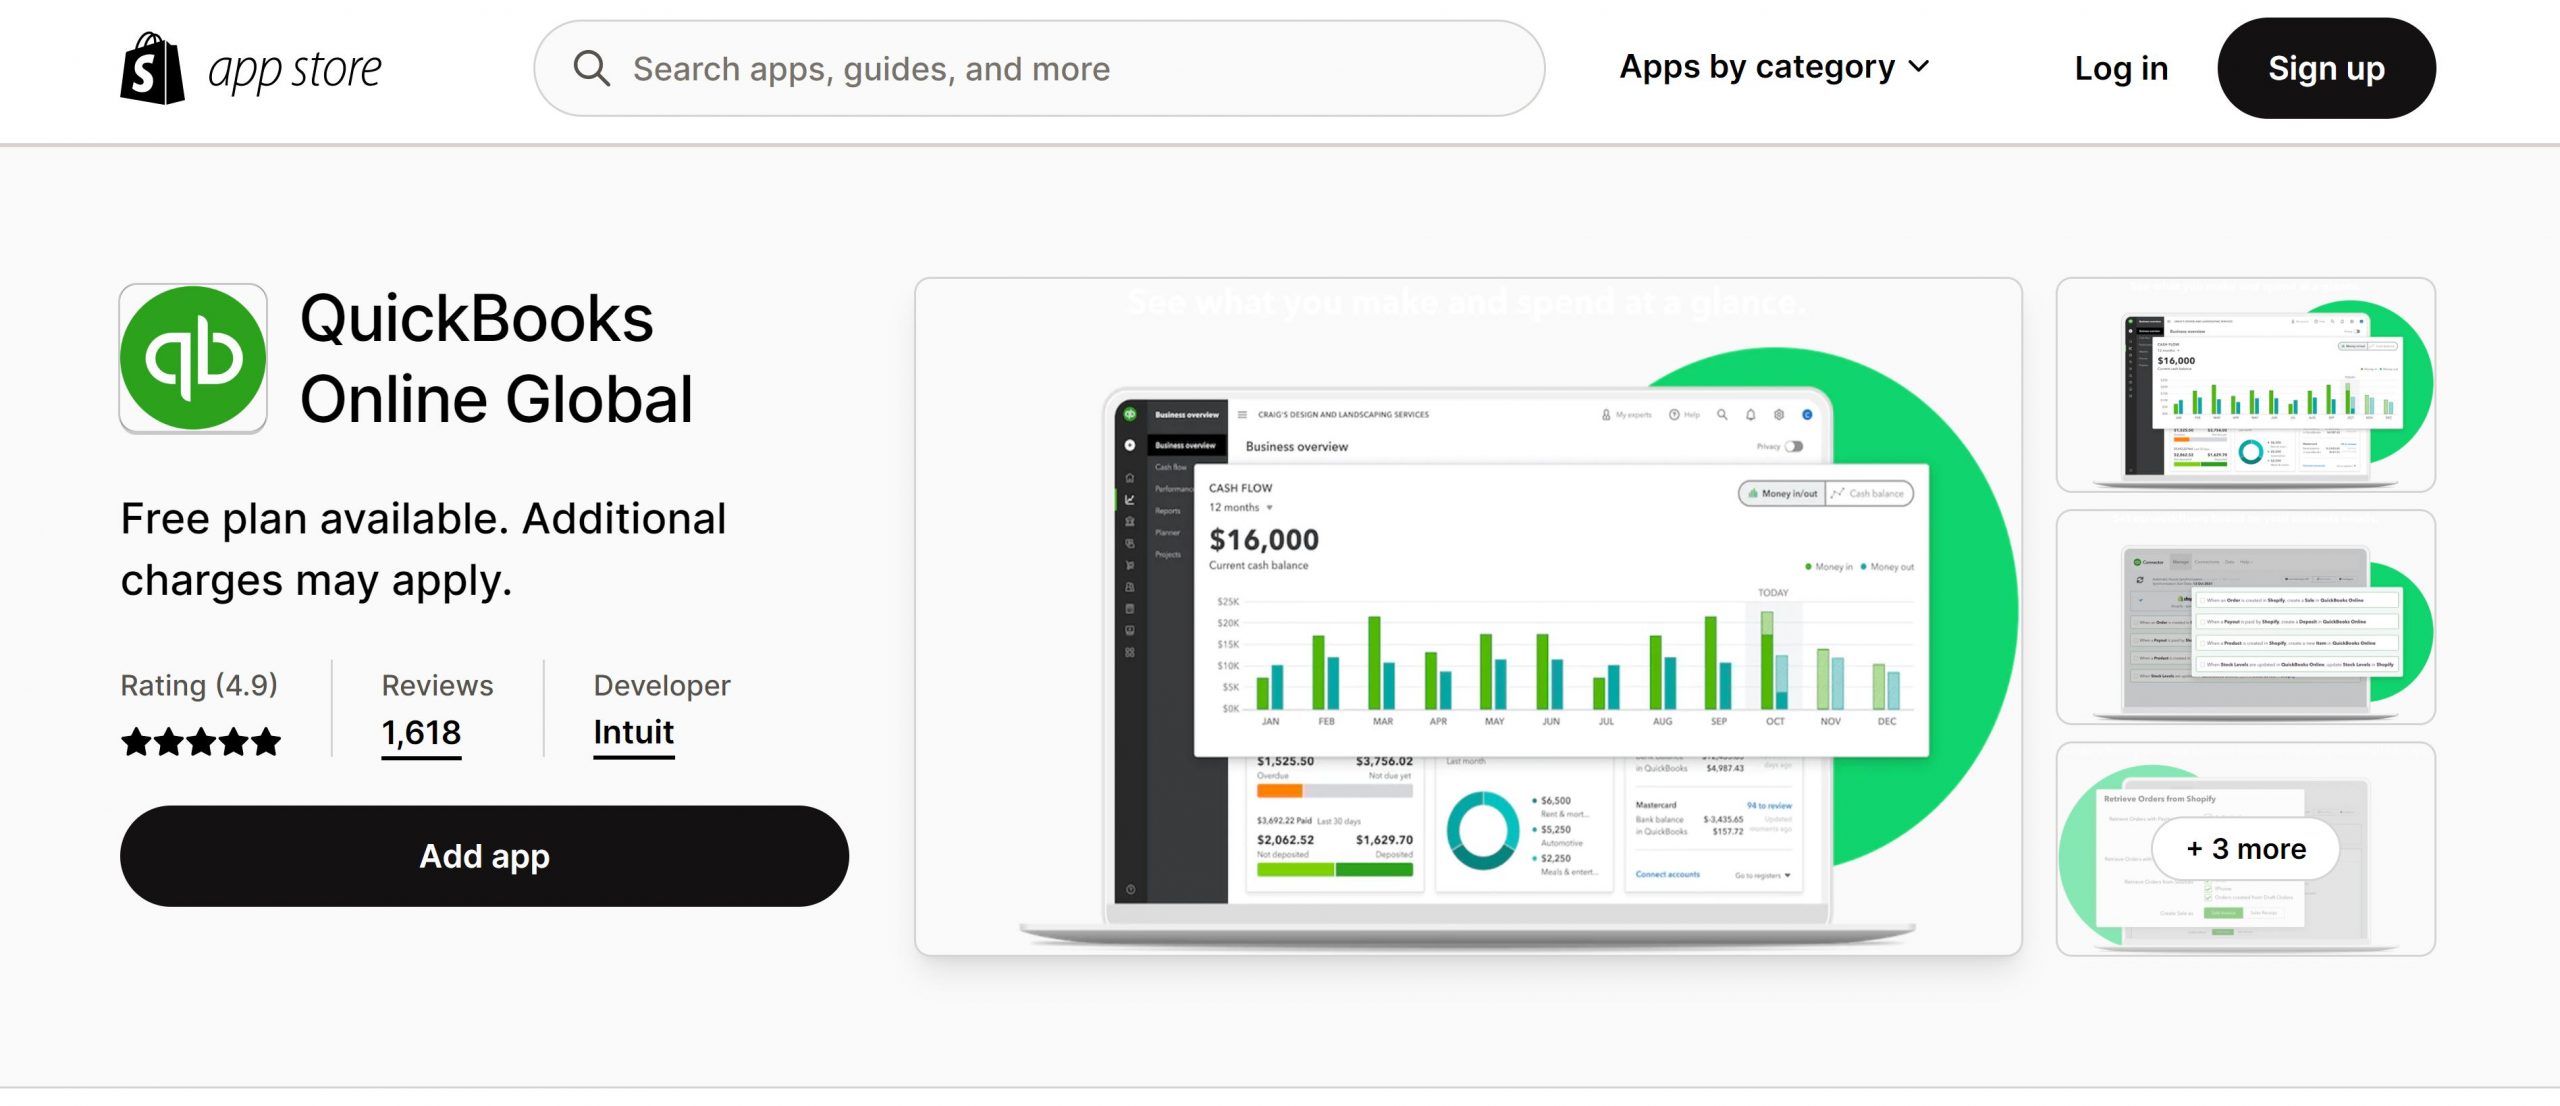 QuickBooks Online Global on the Shopify app store.